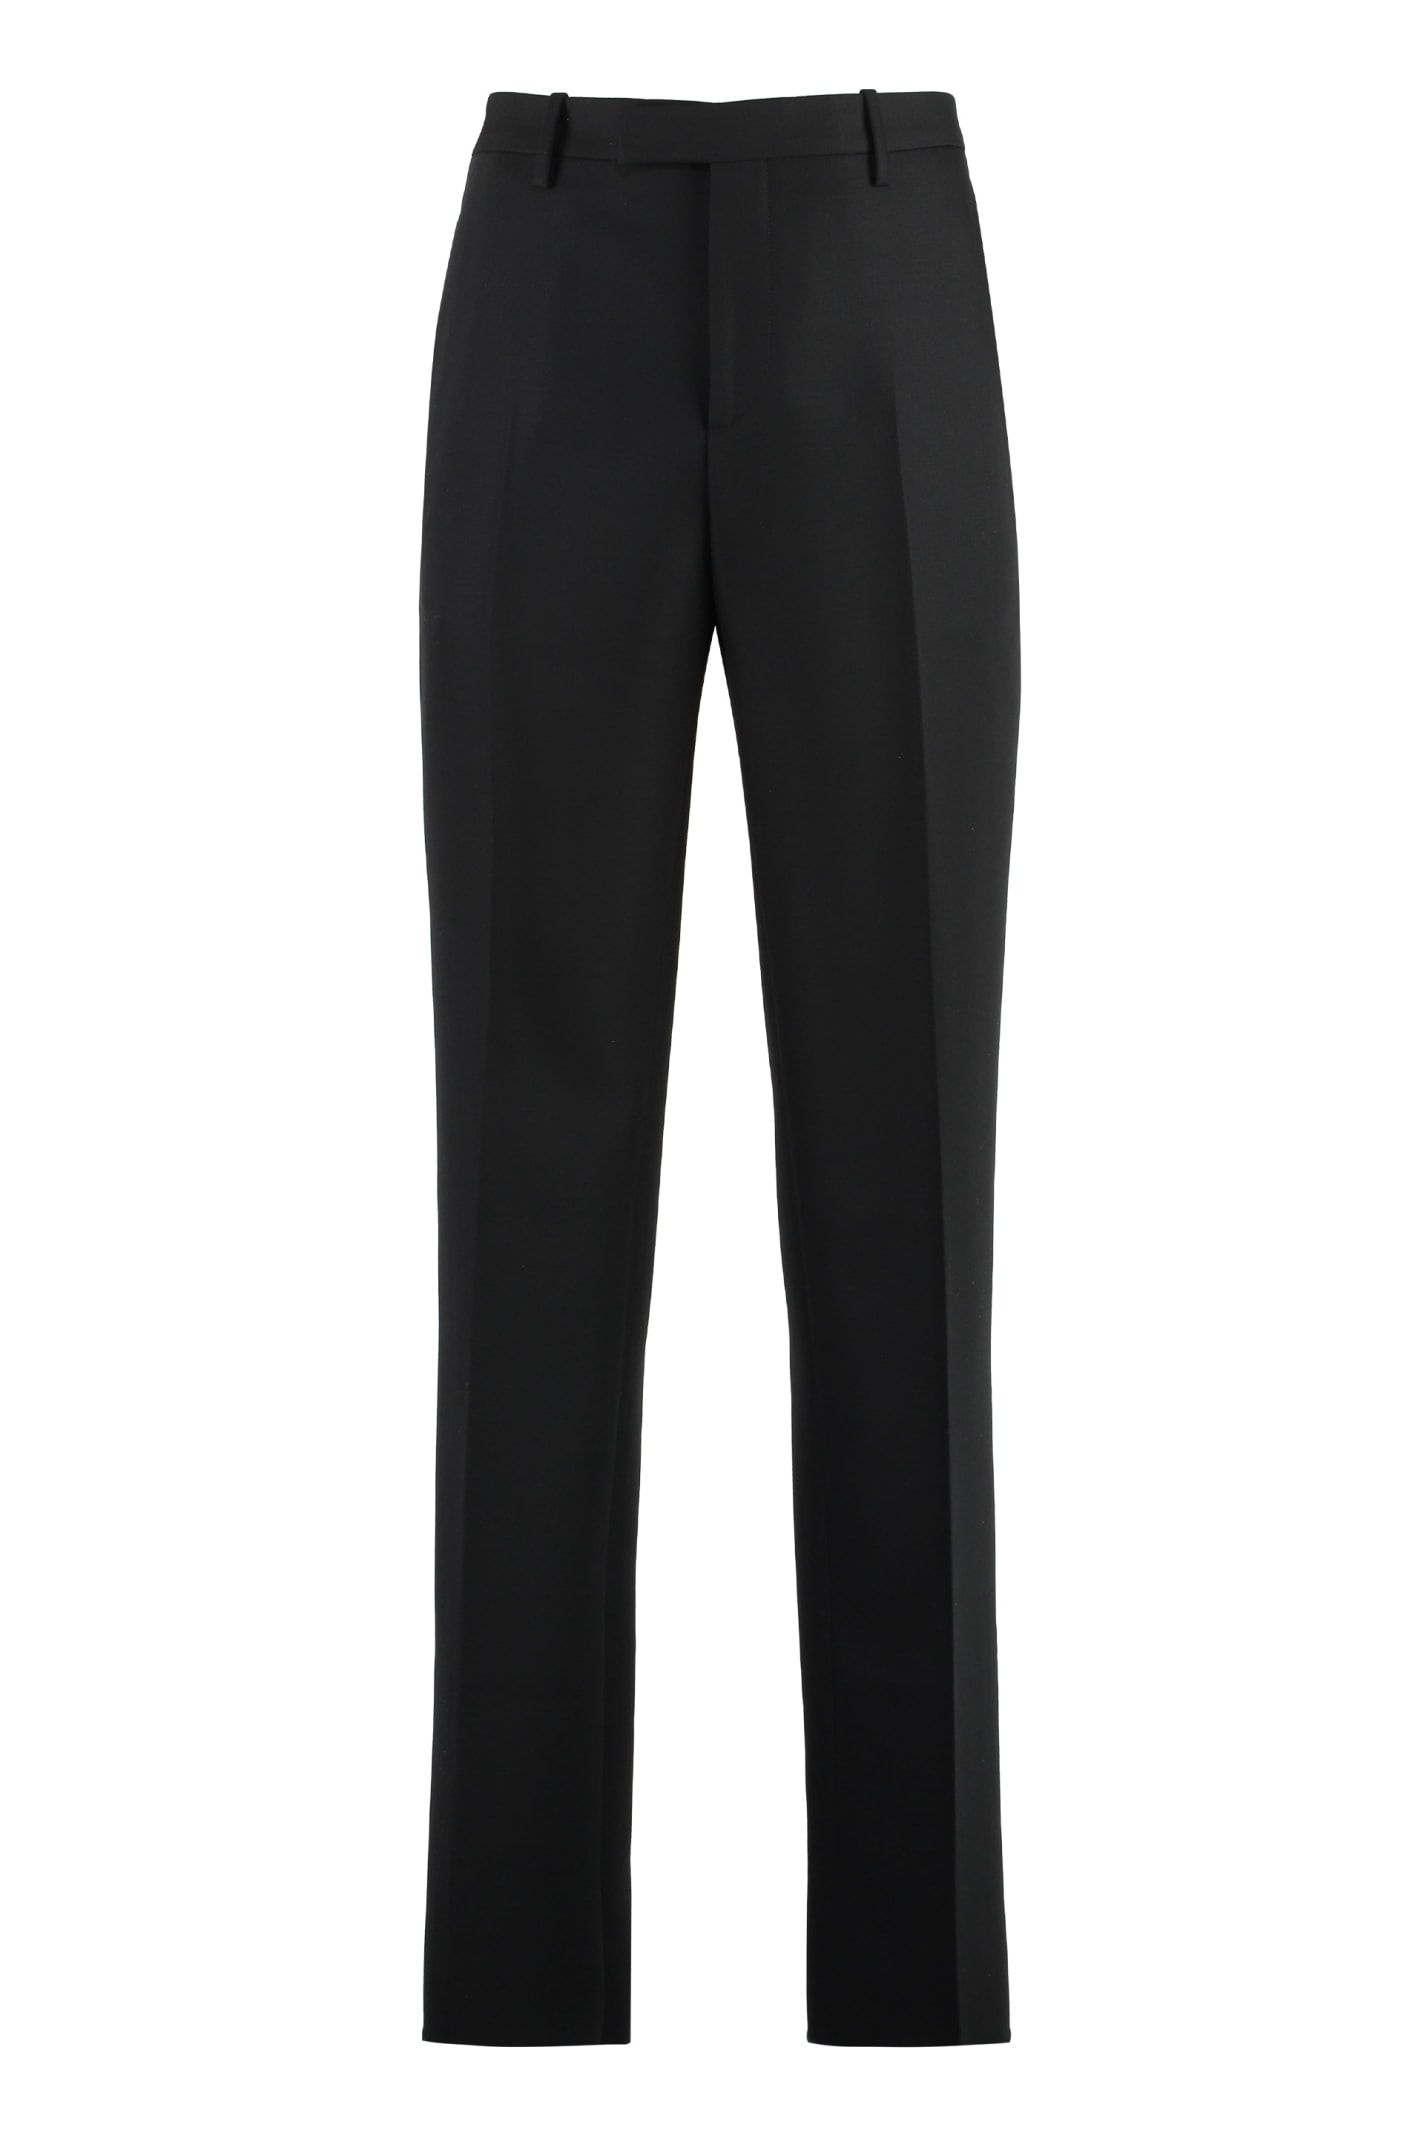 OFF-WHITE WOOL TAILORED TROUSERS